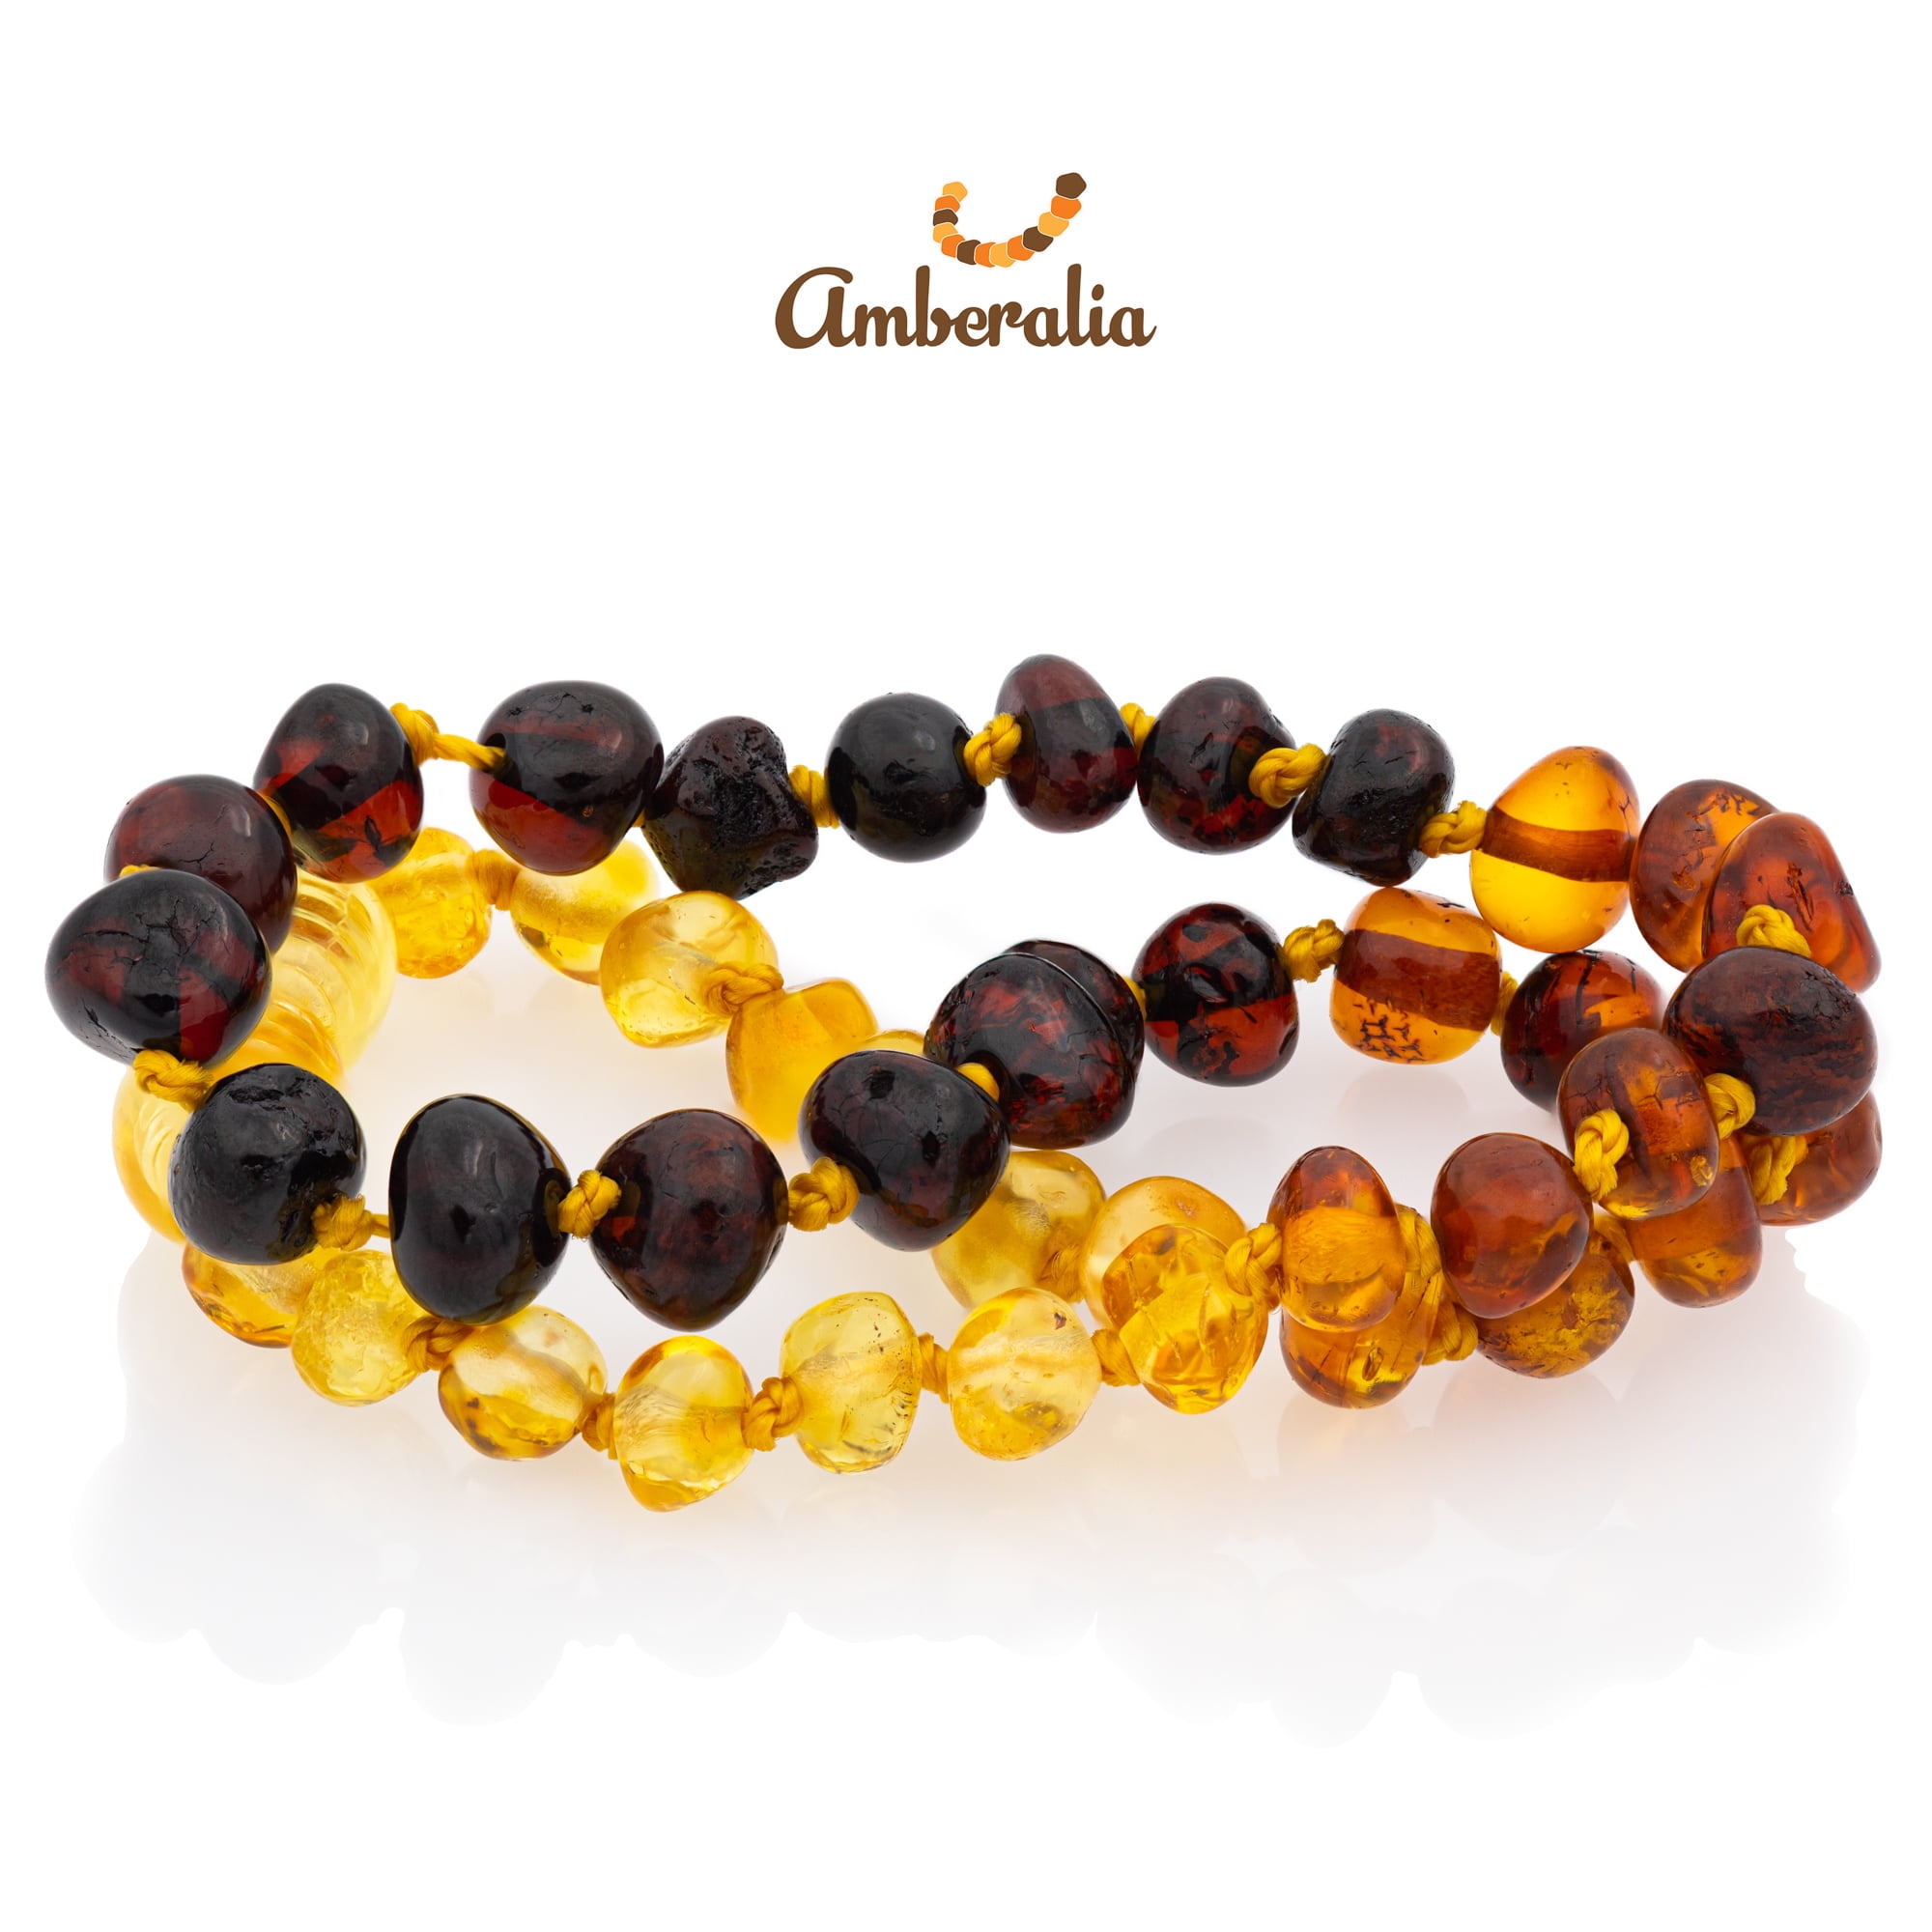 14cm Amberalia Baltic Amber knotted bracelet - Cherry/Cognac 5.5 inches GIA Certificated- Boost immune system 